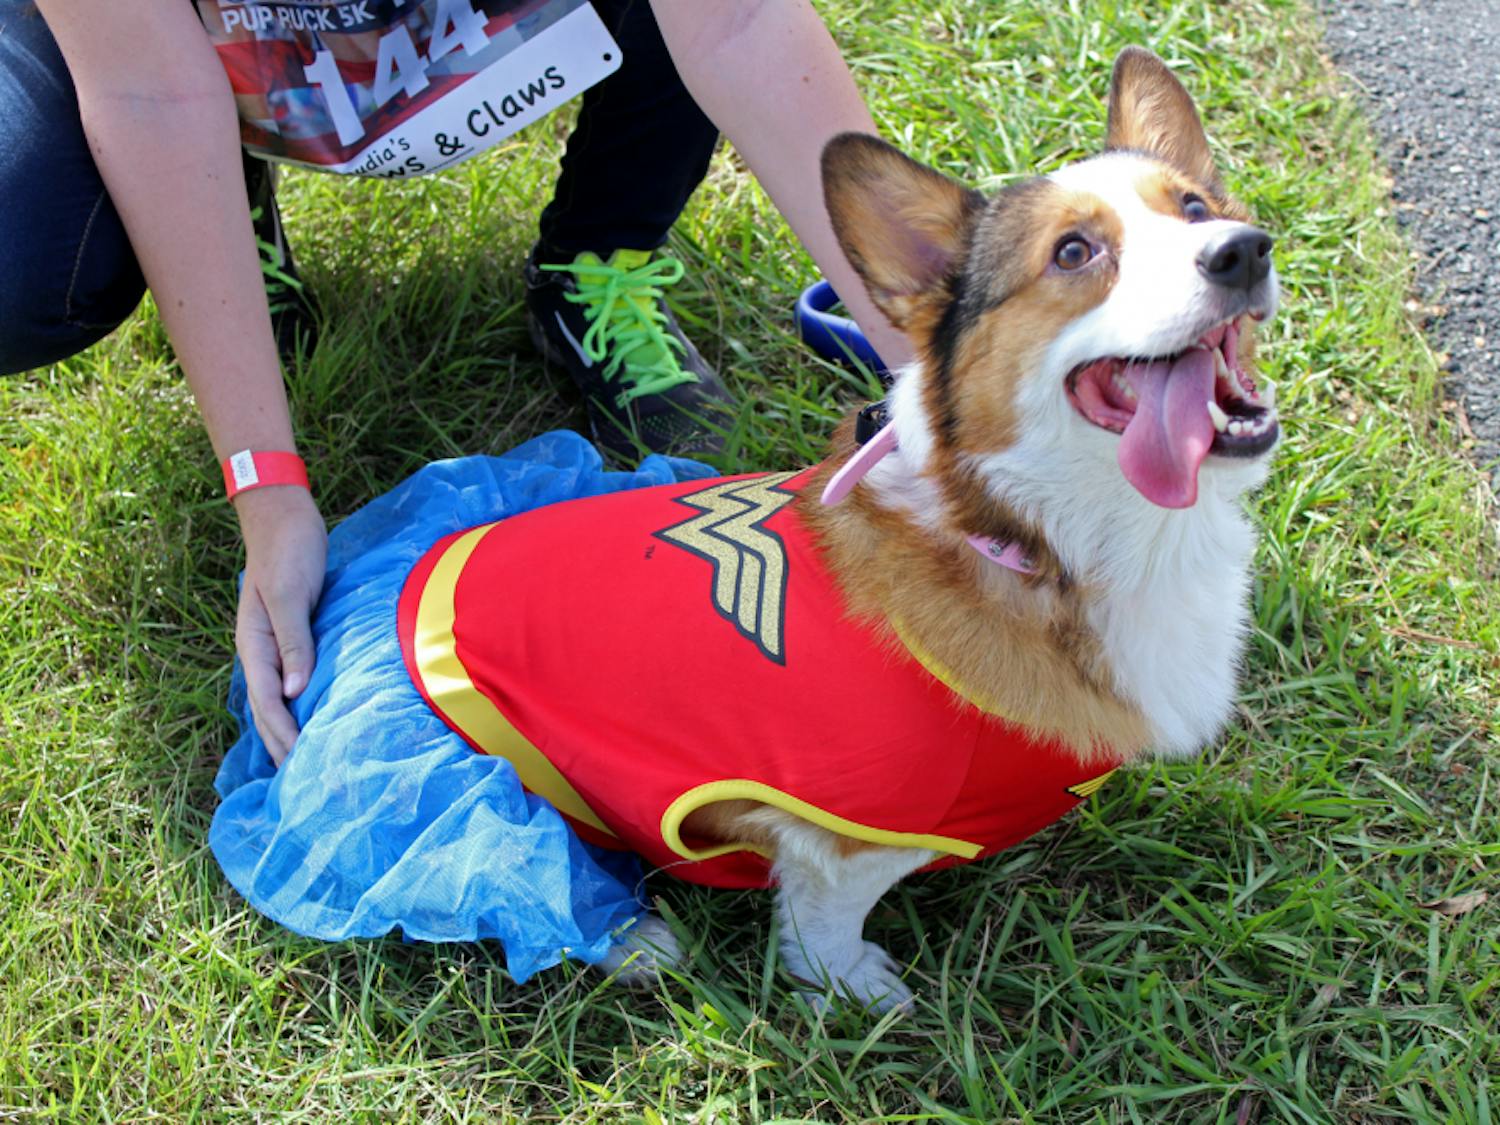 Pez, a 5-year-old Pembroke Welsh corgi, looks up at attendees of the first Pup Ruck 5k at Depot Park on Sunday. The event was held to raise money for the Pets and Patriots Foundation, which helps veterans with post-traumatic stress disorder acquire service dogs.